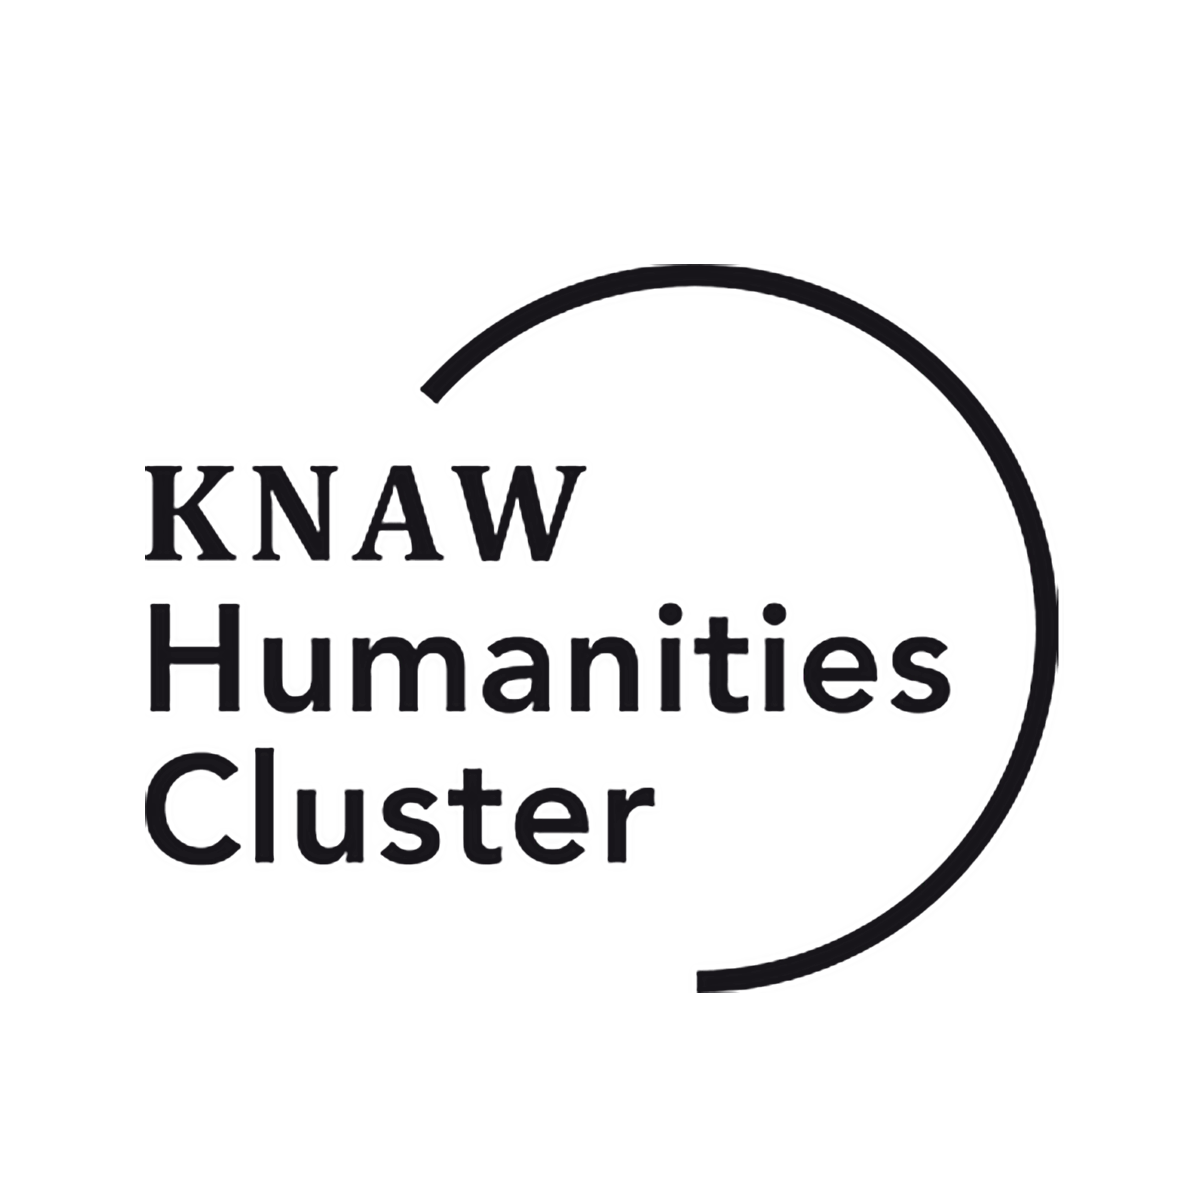 KNAW Humanities Cluster